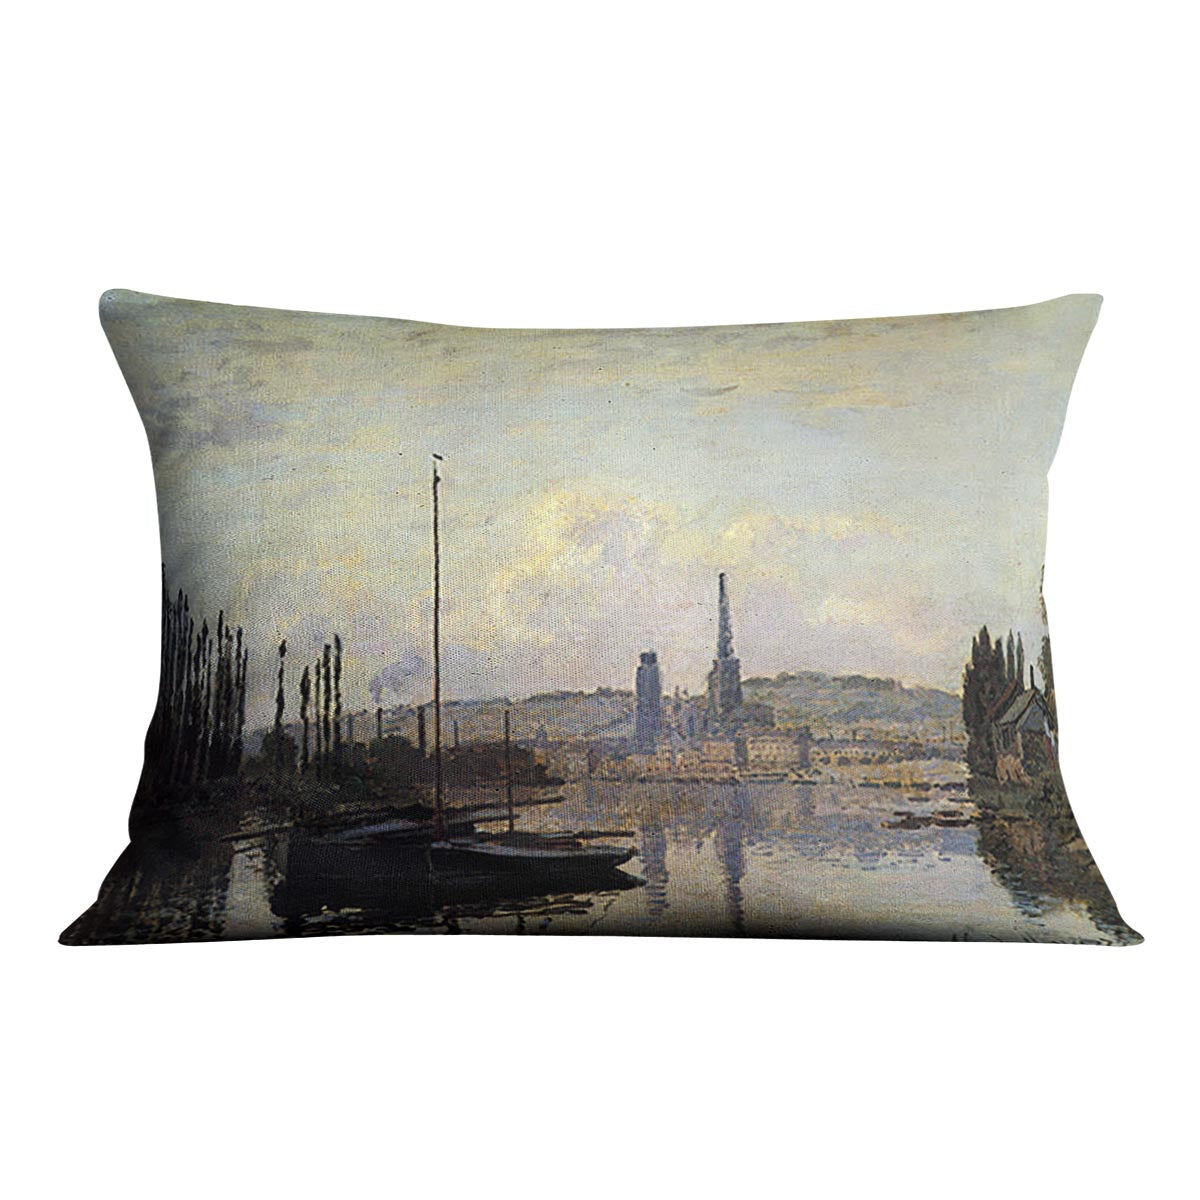 View of Rouen by Monet Cushion